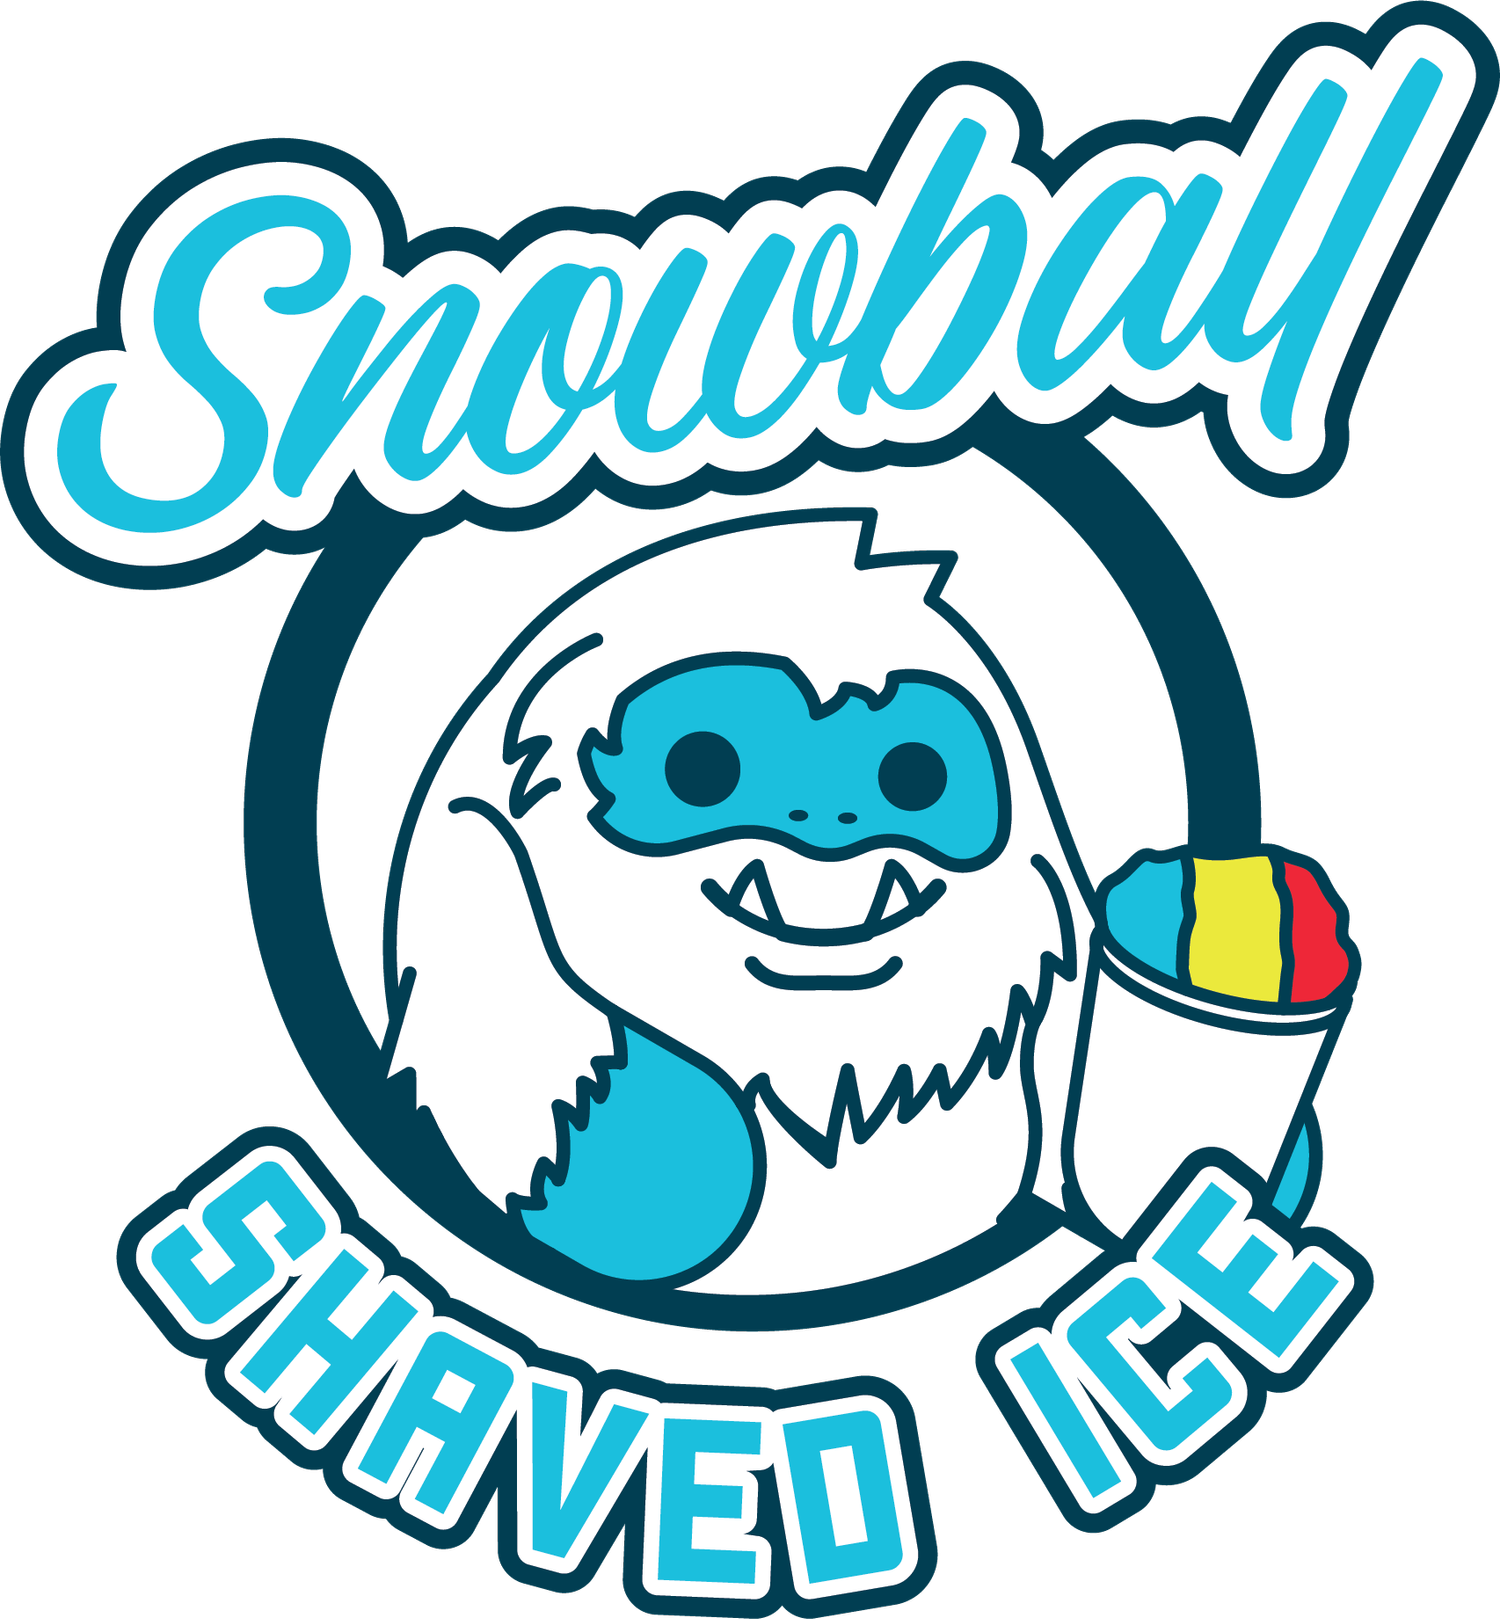 Snowball Shaved Ice